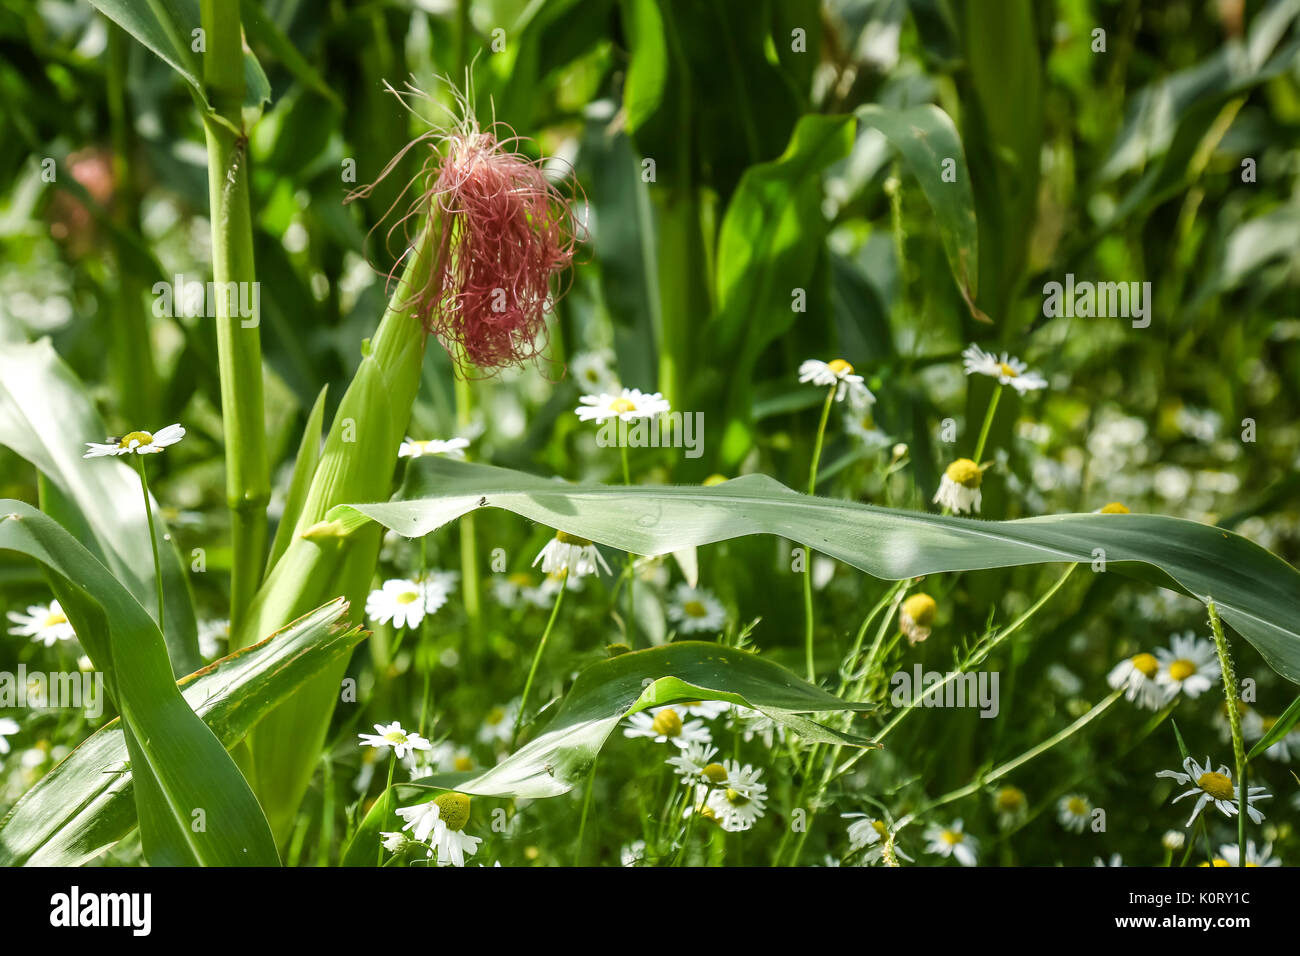 Maize crops ripening in August sunshine with wild daisies growing between the rows Stock Photo